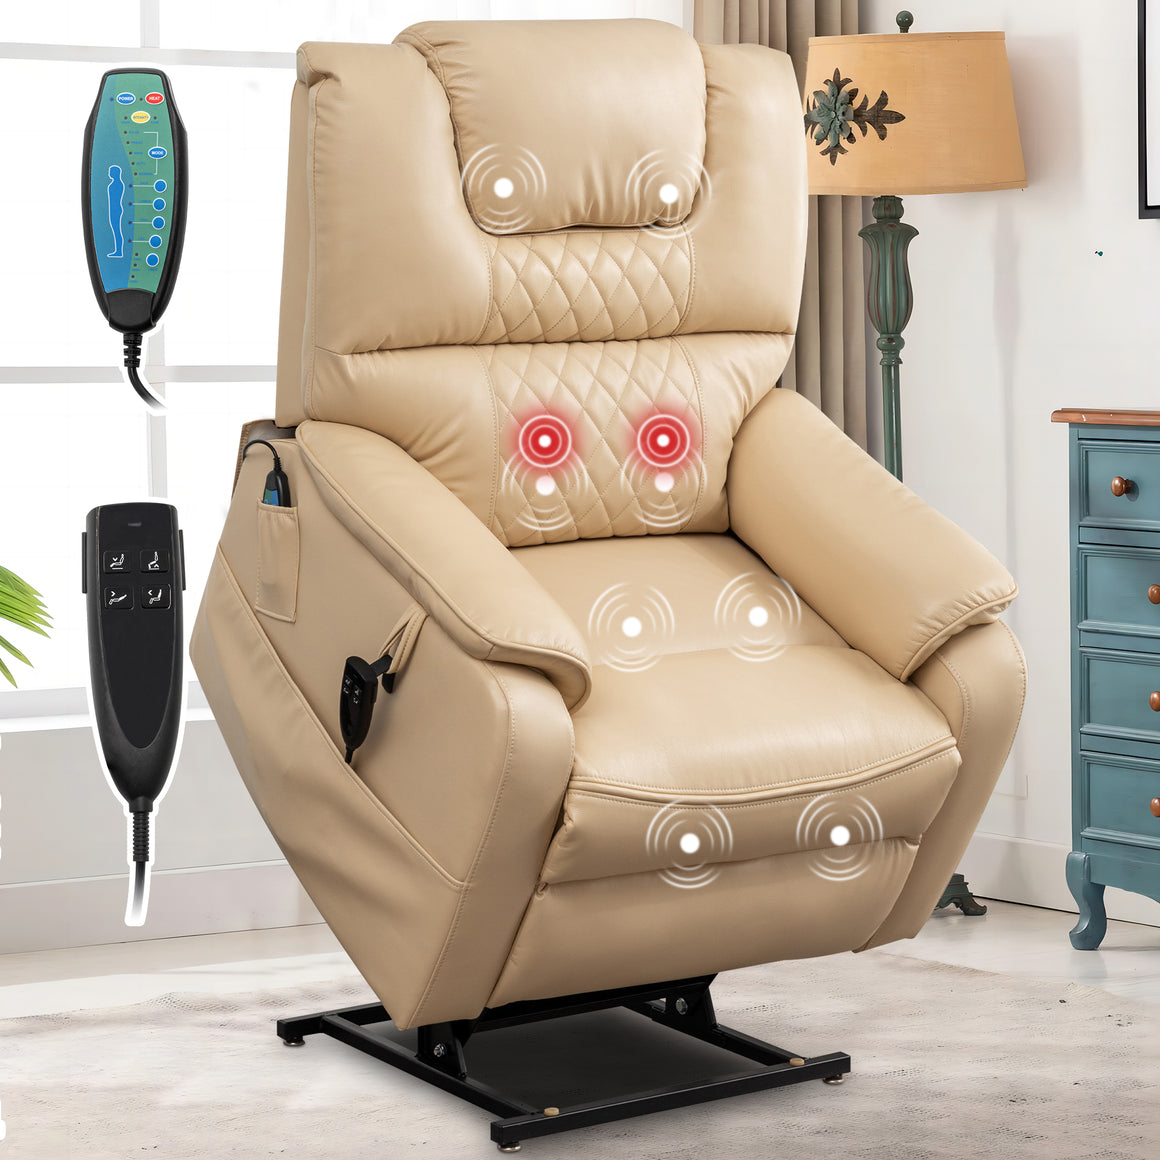 uhomepro Large Heated Recliner Massage Chair 400 LB for Big and Tall, PU Leather Power Lift Recliner, Infinite Position Oversize Massage Living Room Chair